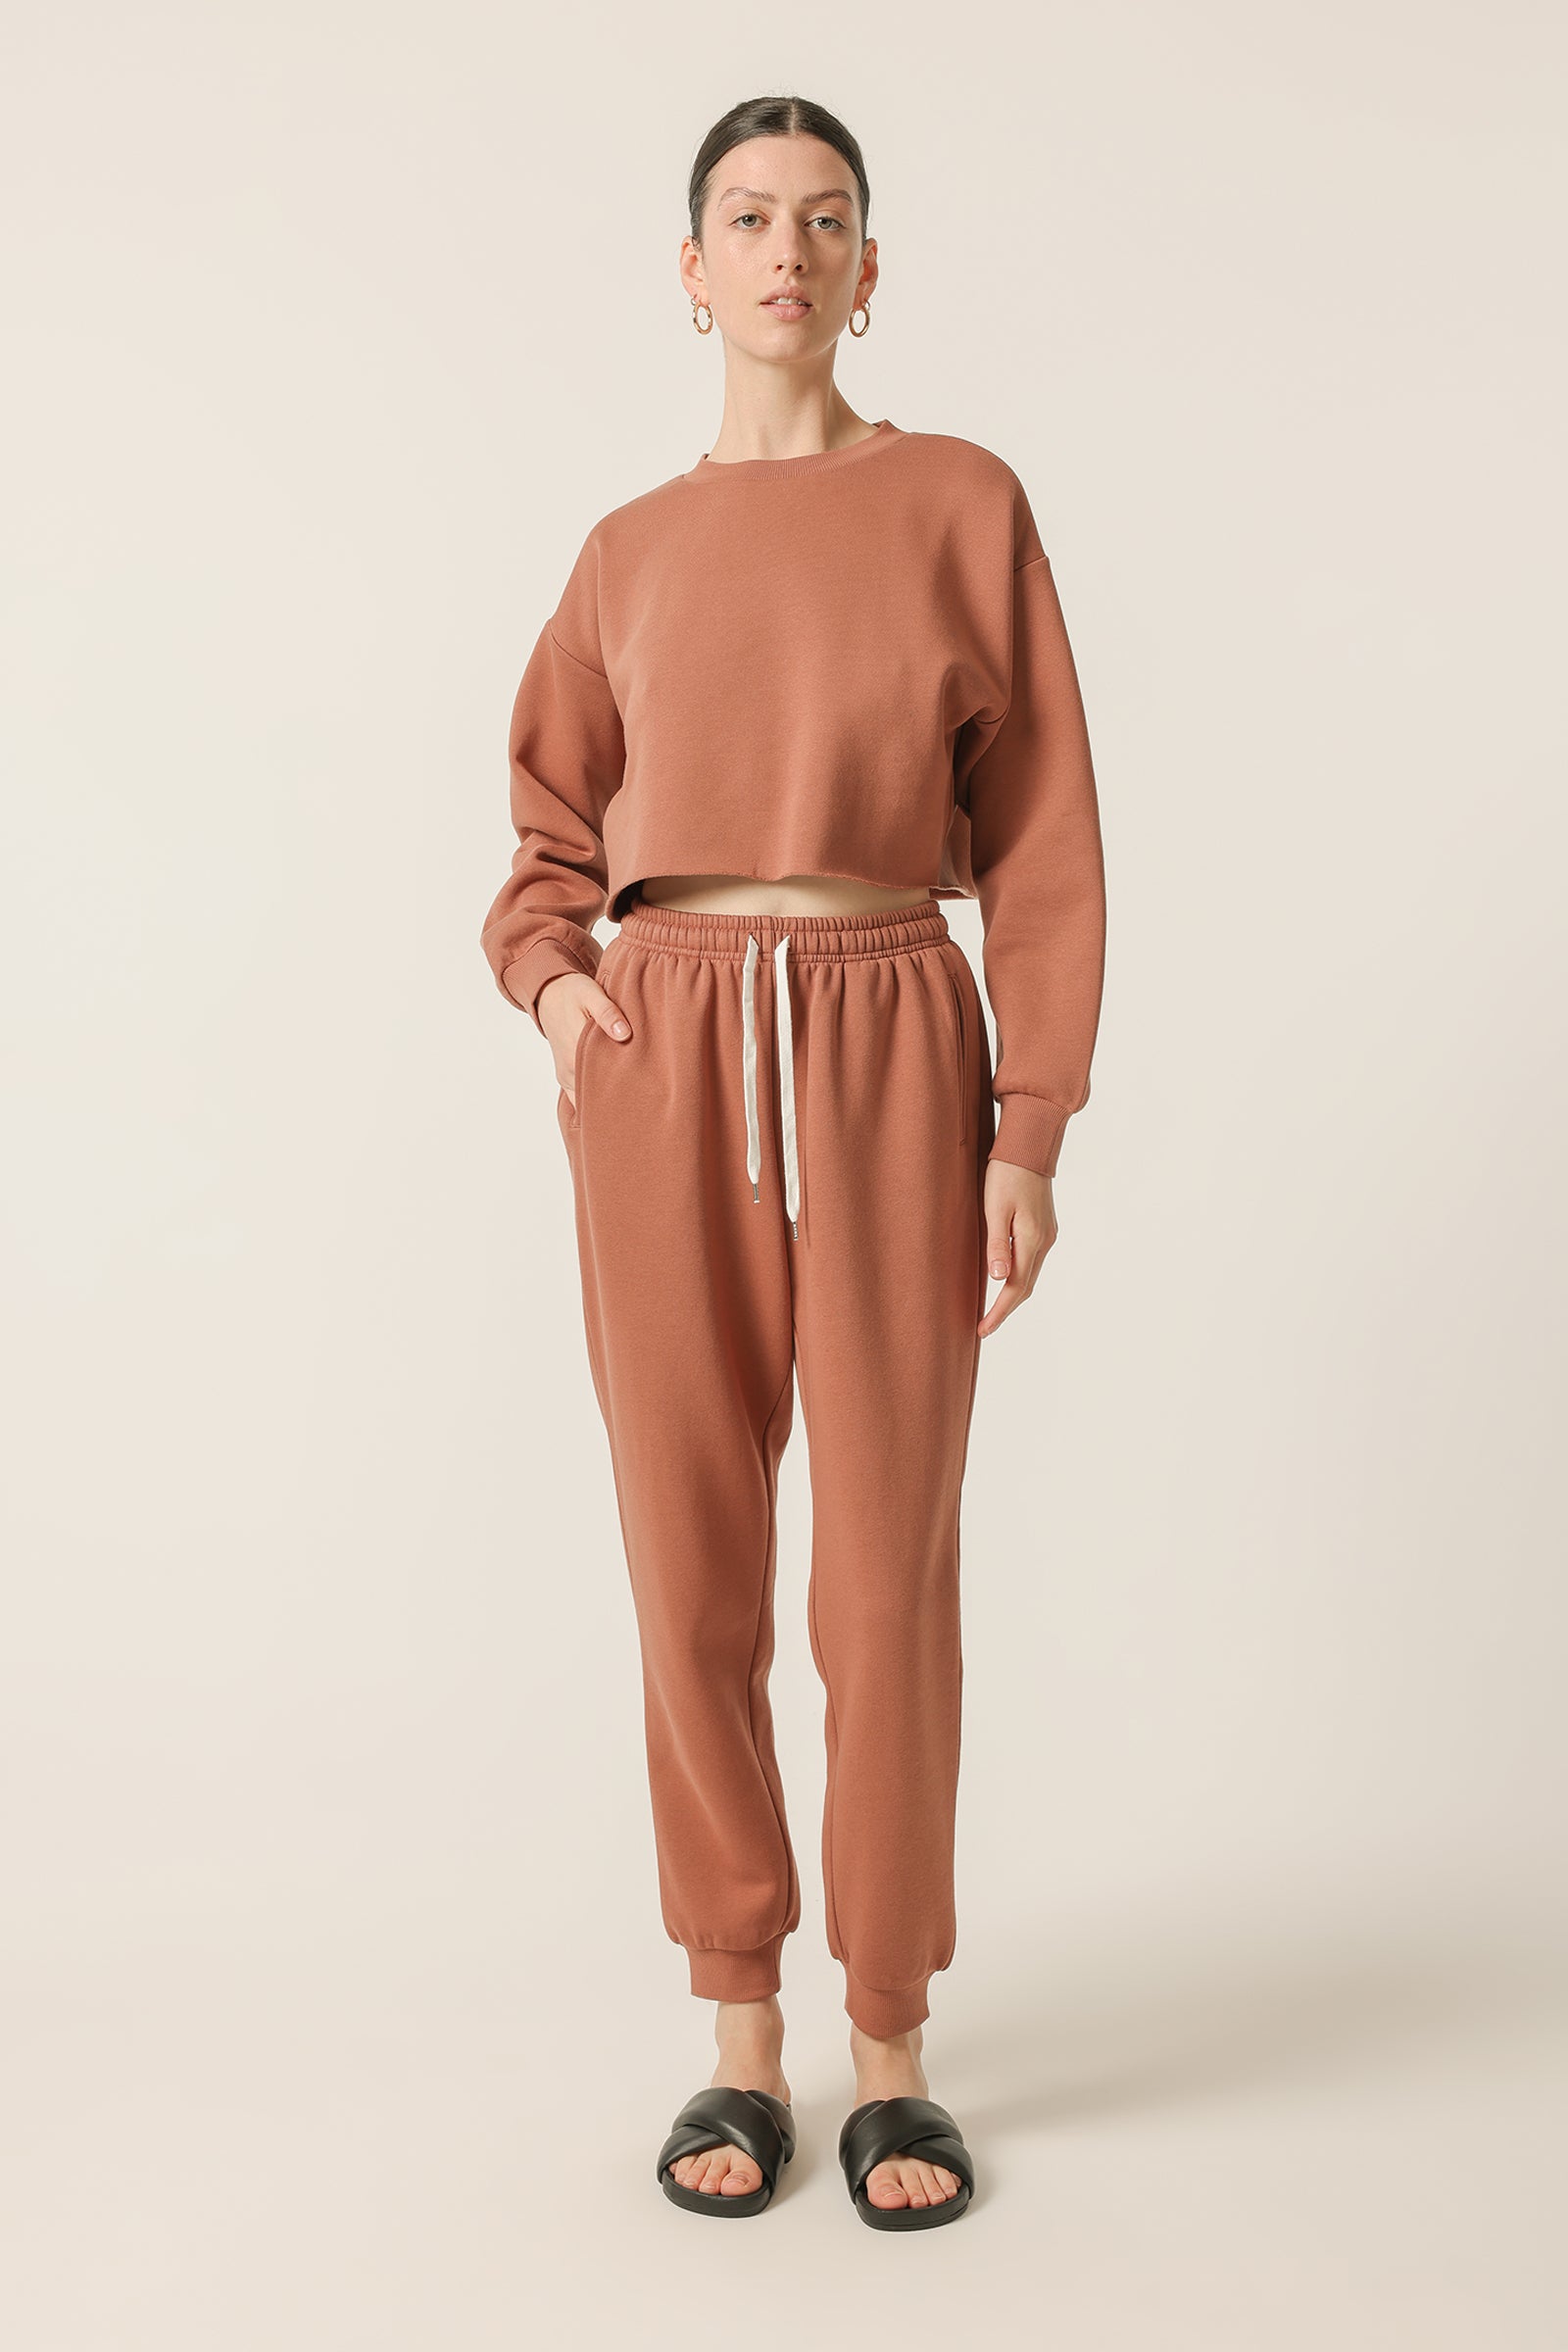 Nude Lucy Carter Classic Trackpant in a Light Brown Brandy Colour